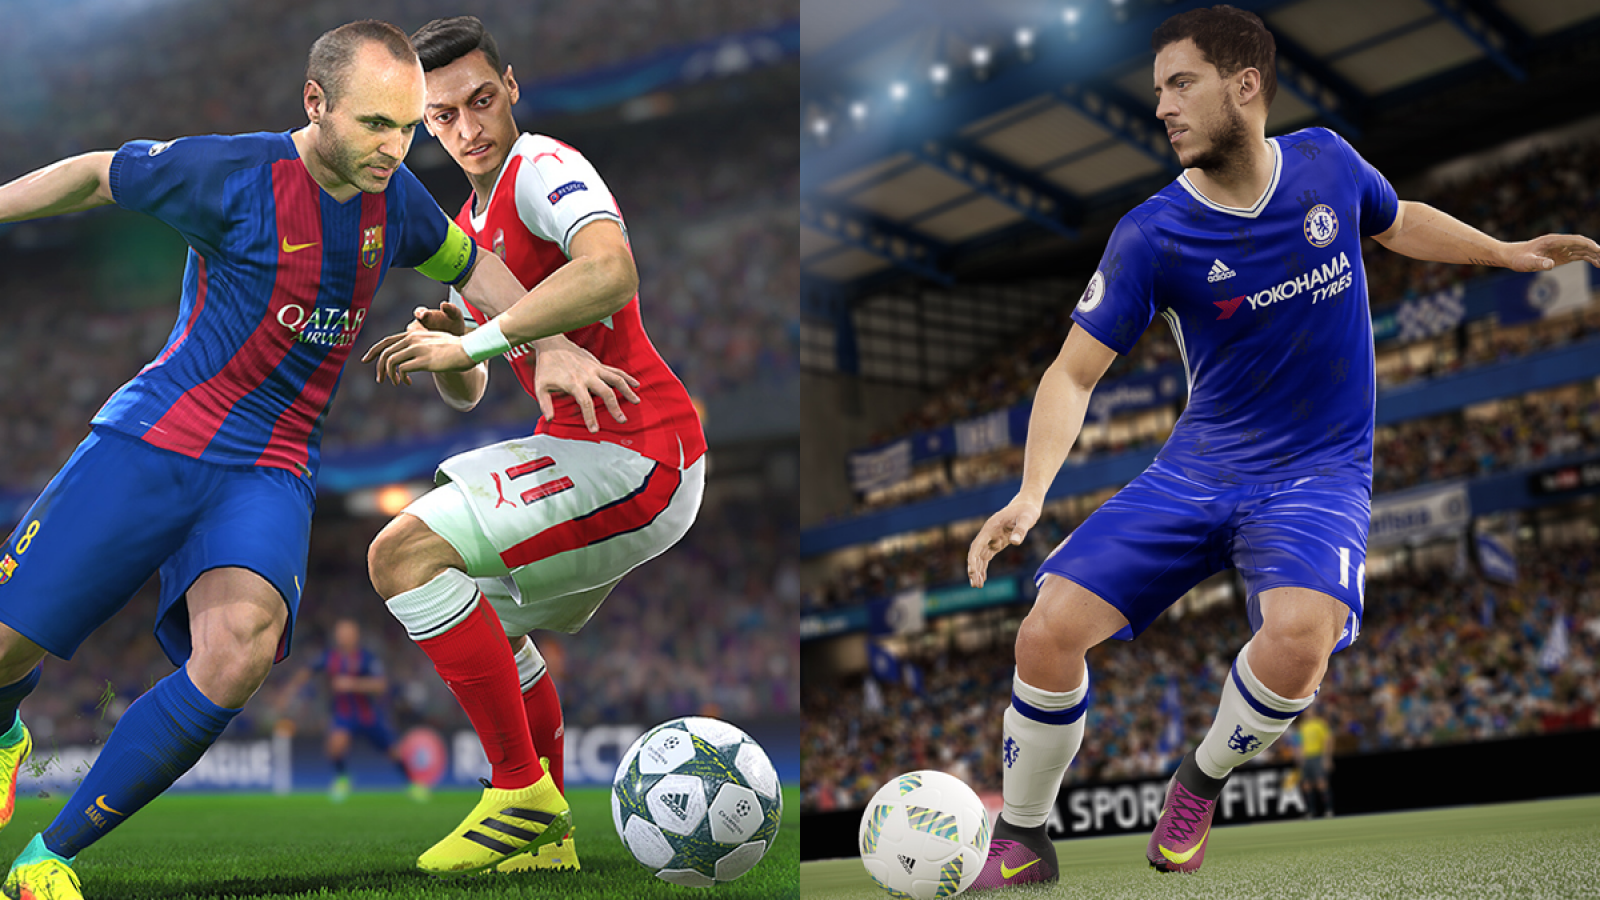 Onbepaald Jaar Laan Fifa 17 vs PES 2017 previews: Which is going to be better?